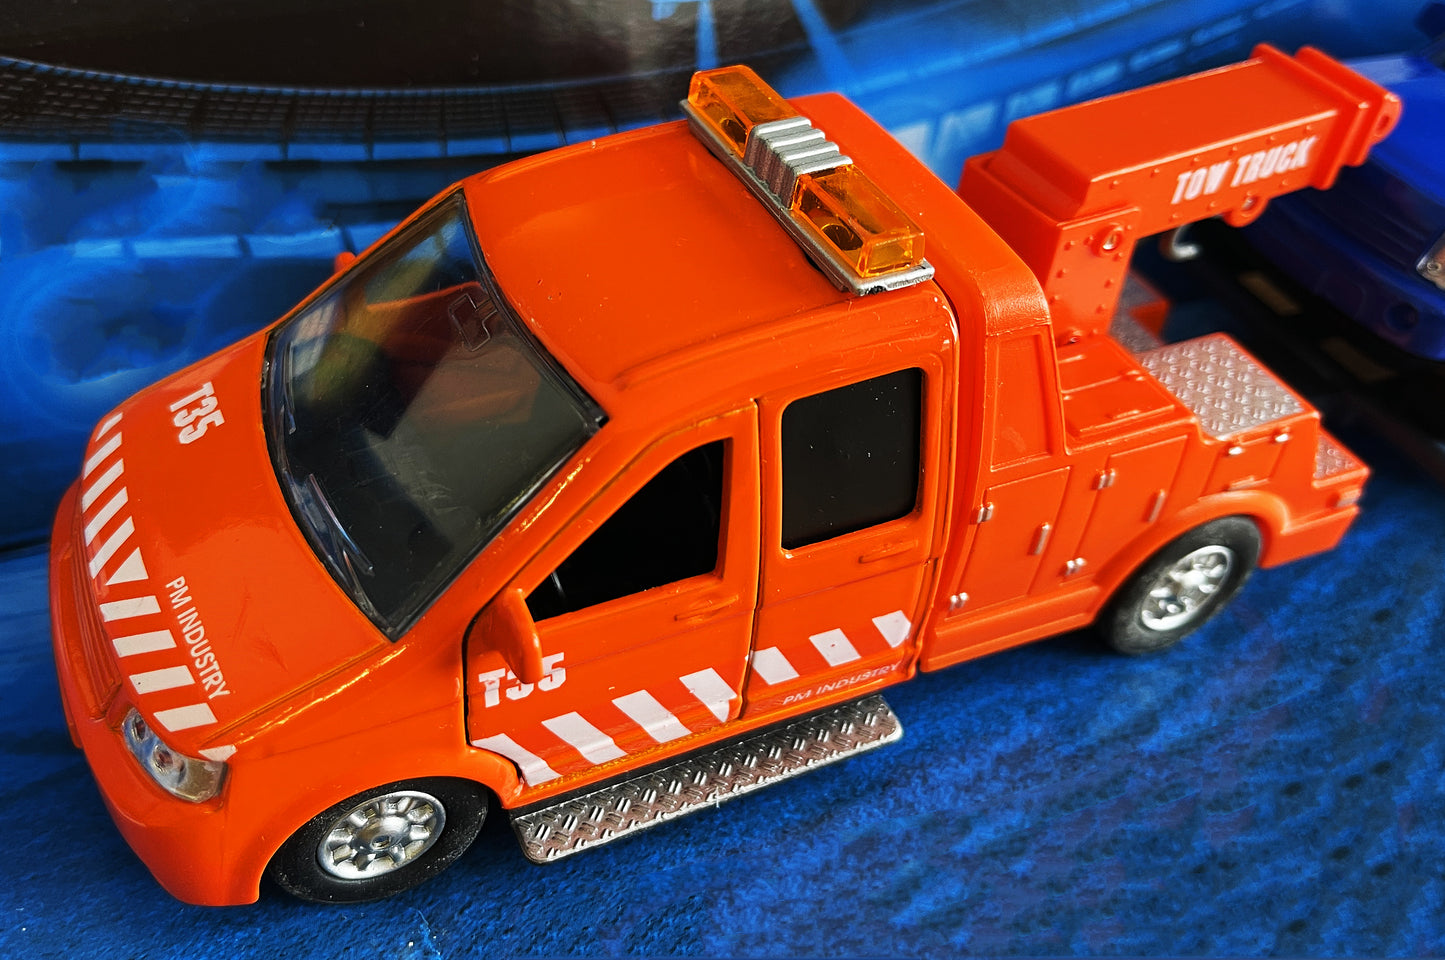 Teamsterz 4 x 4 Recovery Metal Diecast Tow Truck and Car